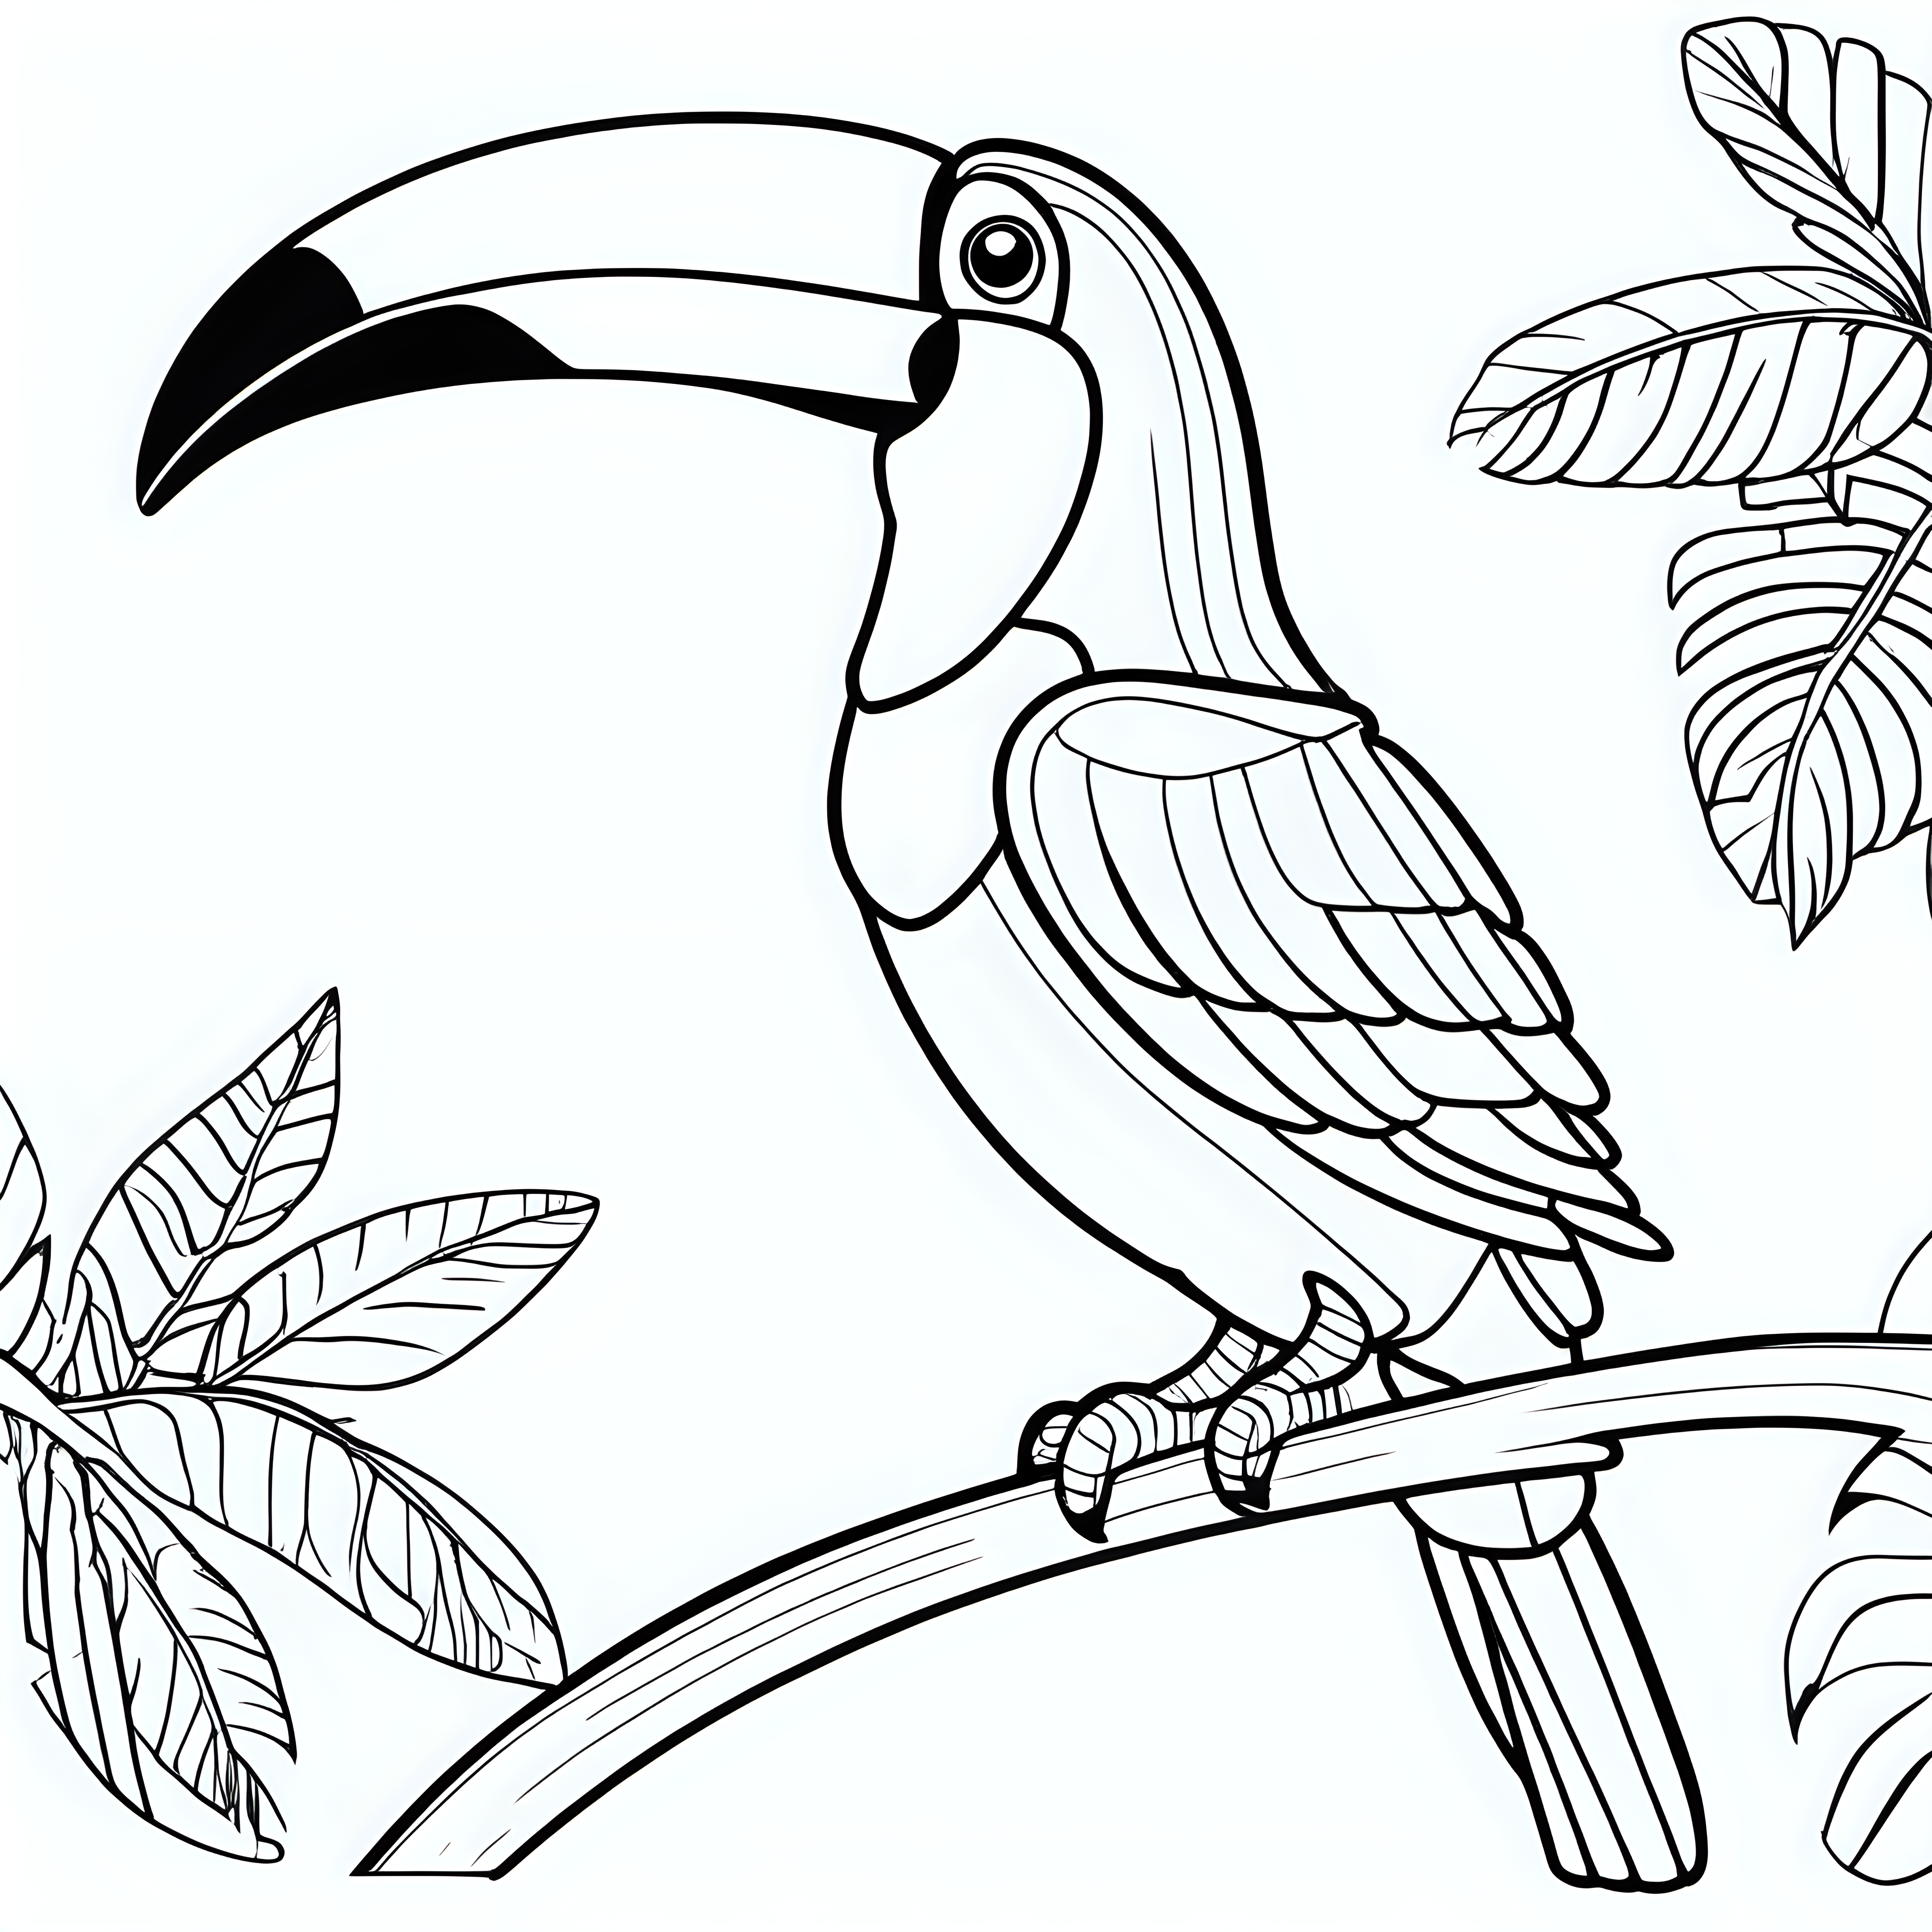 draw a cute Toucans with only the outline in black for a coloring book for kids